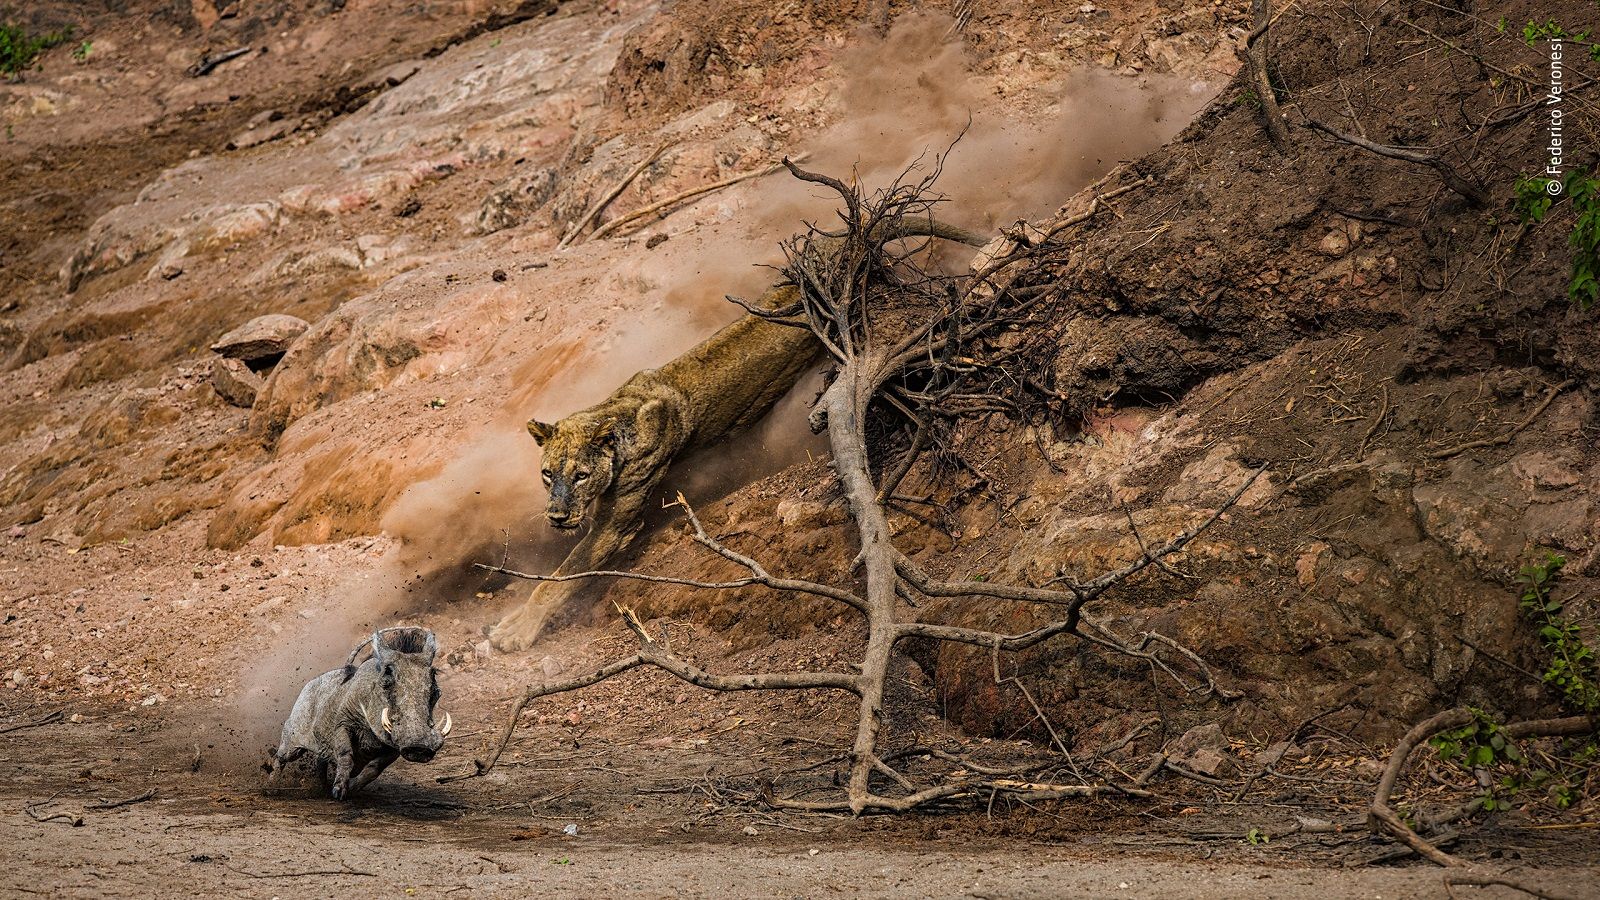 Incredible Images From The Wildlife Photographer Of The Year Competition image 6